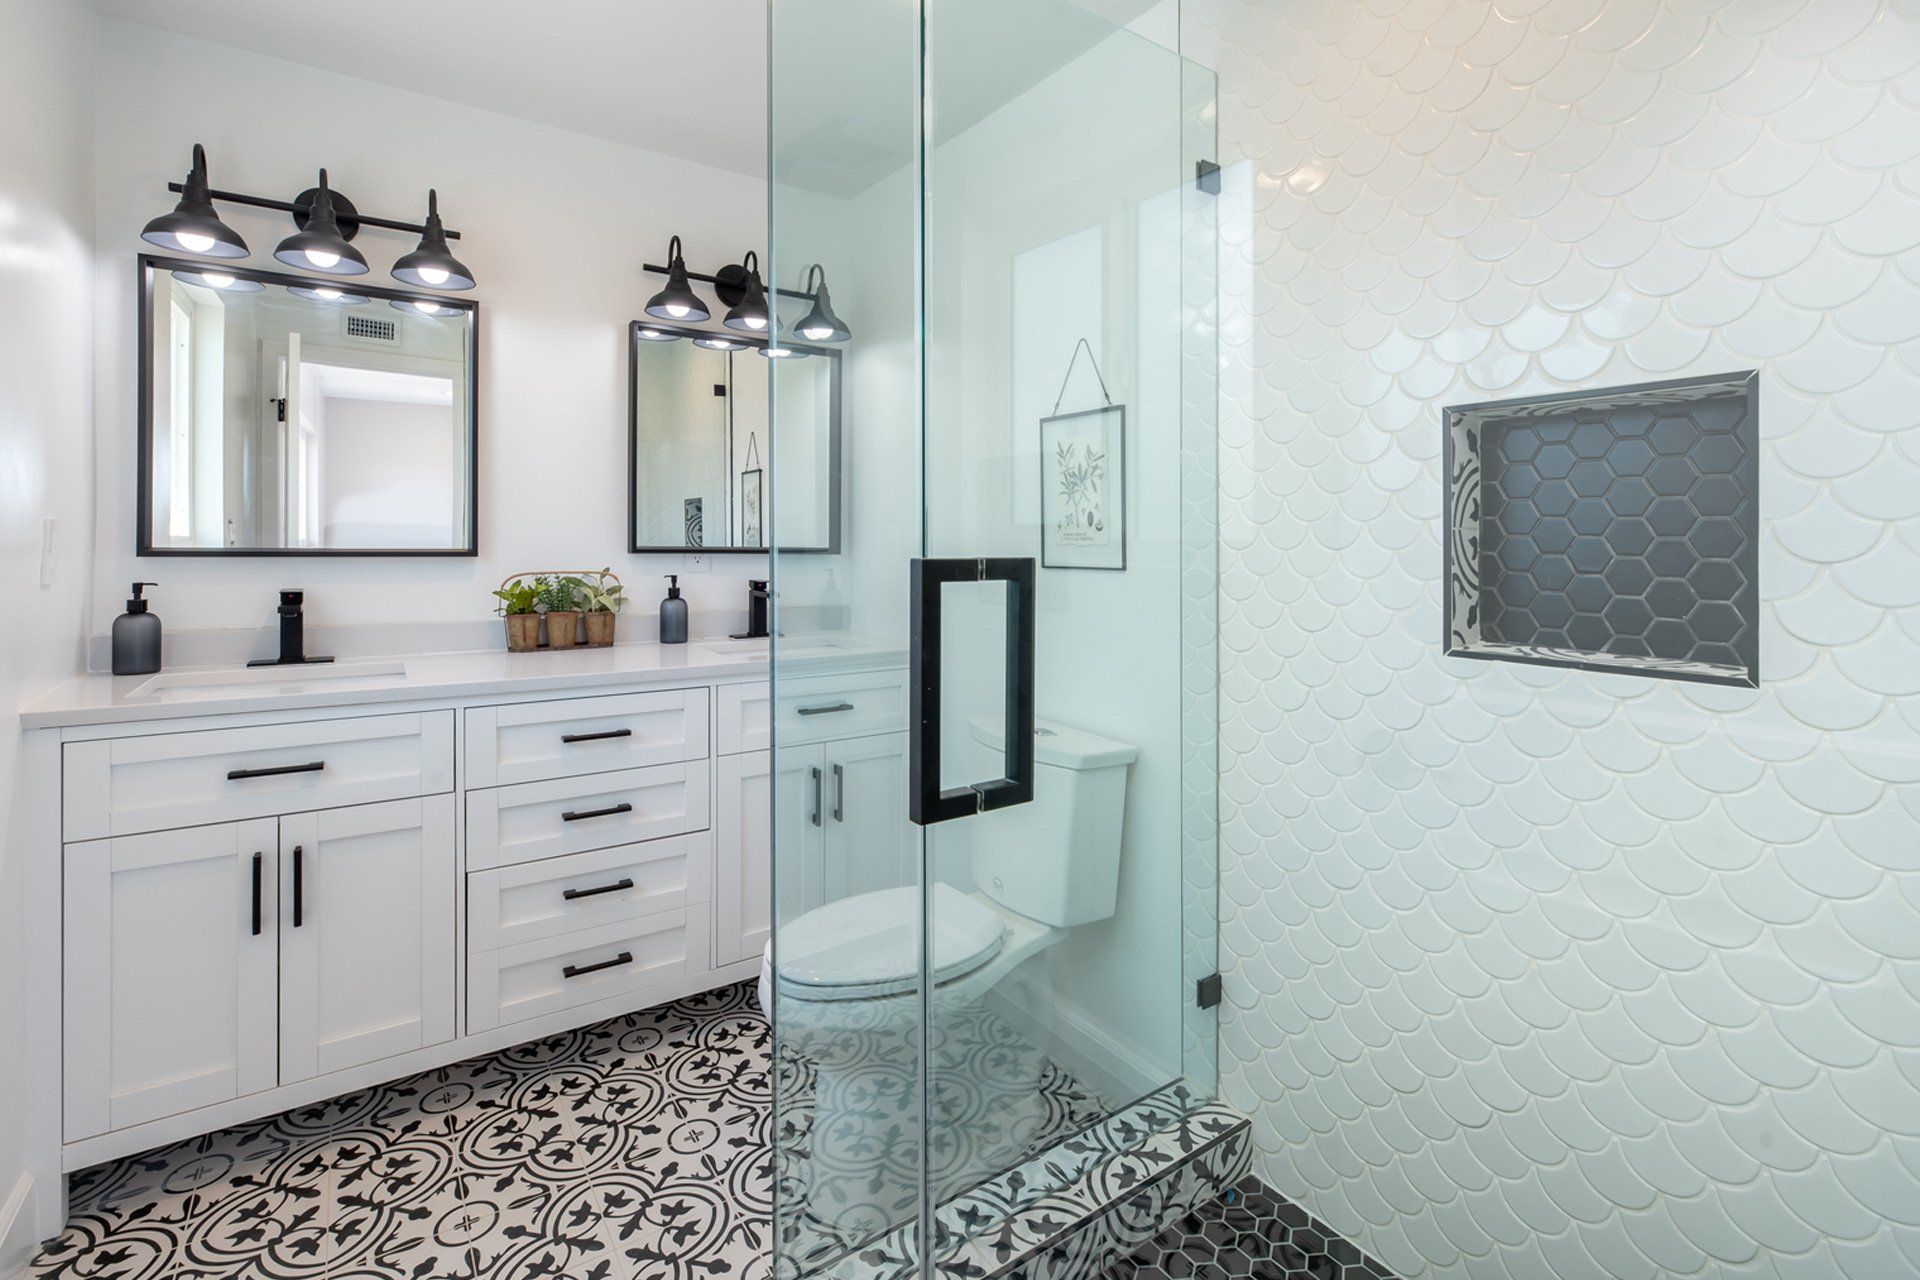 Does Your Bathroom Need A Refresh?